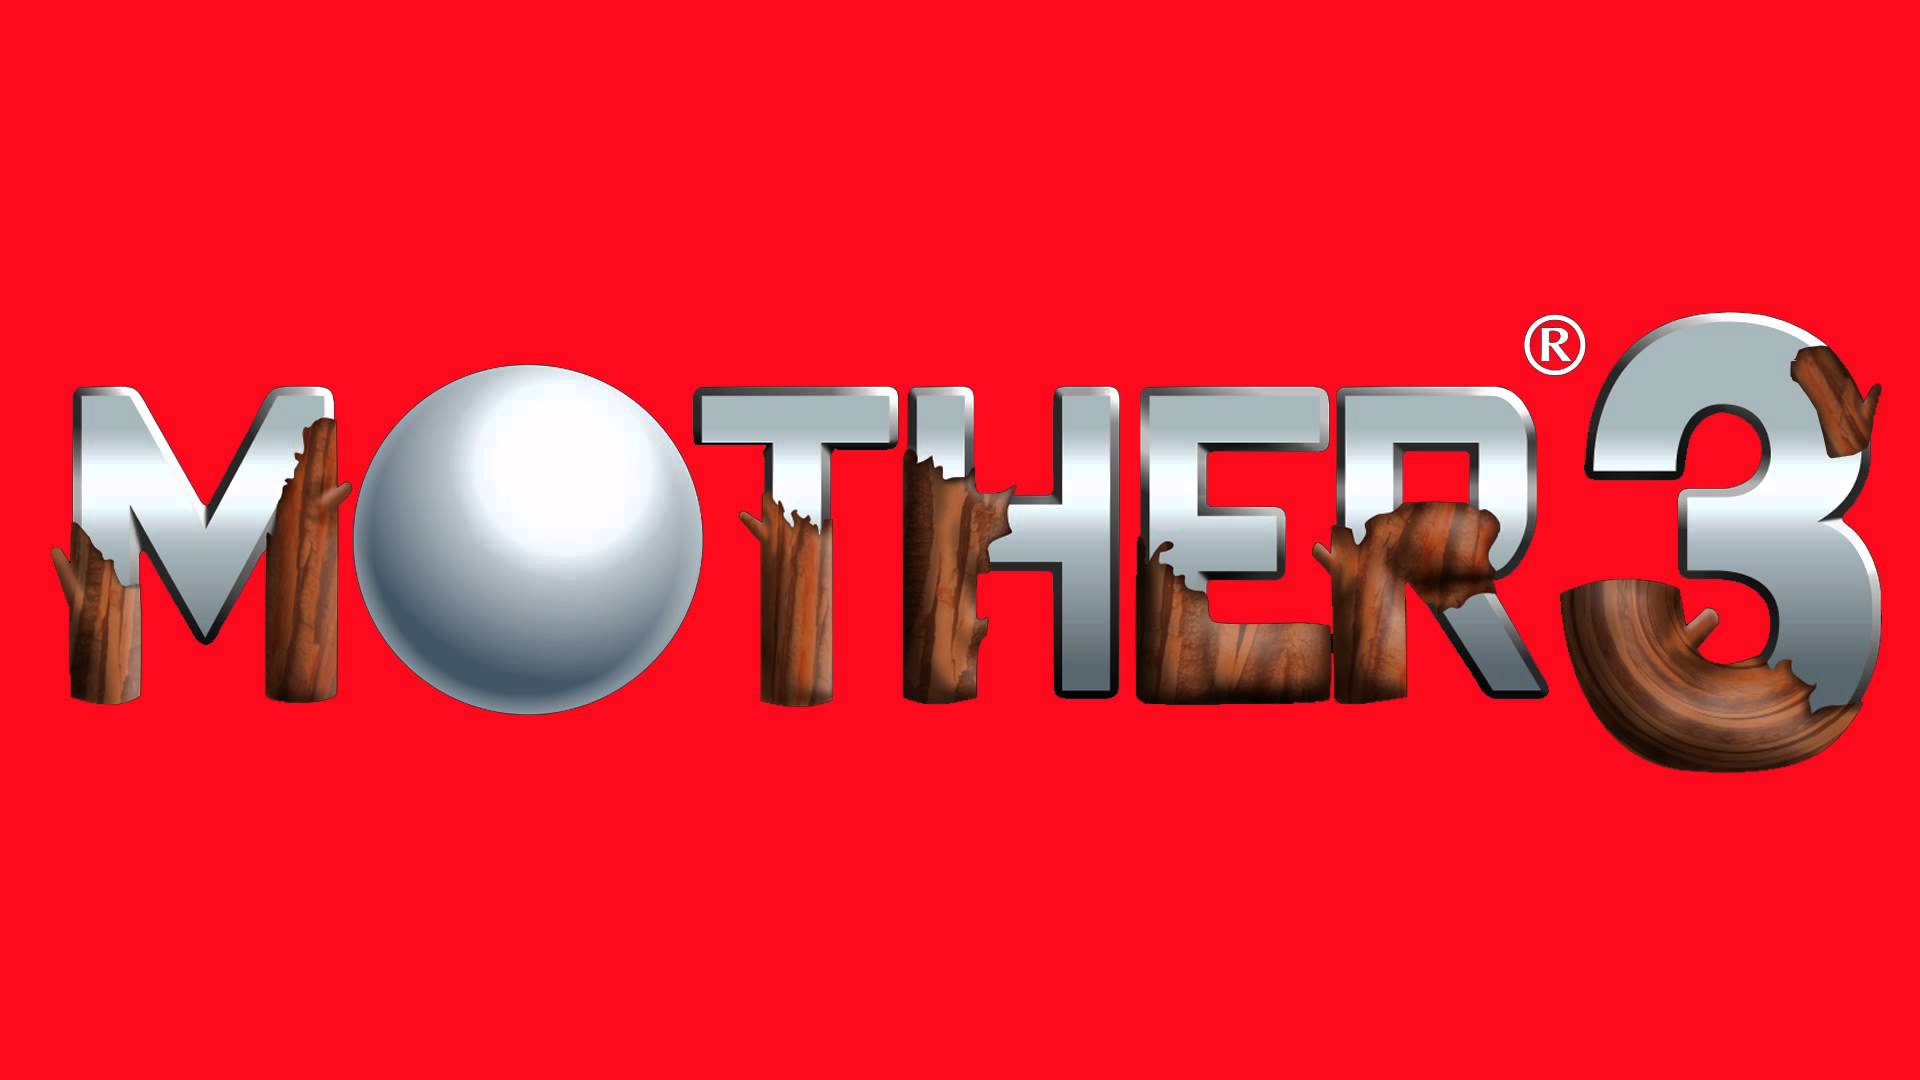 Mother 3’s producer wants to see an English release of the game